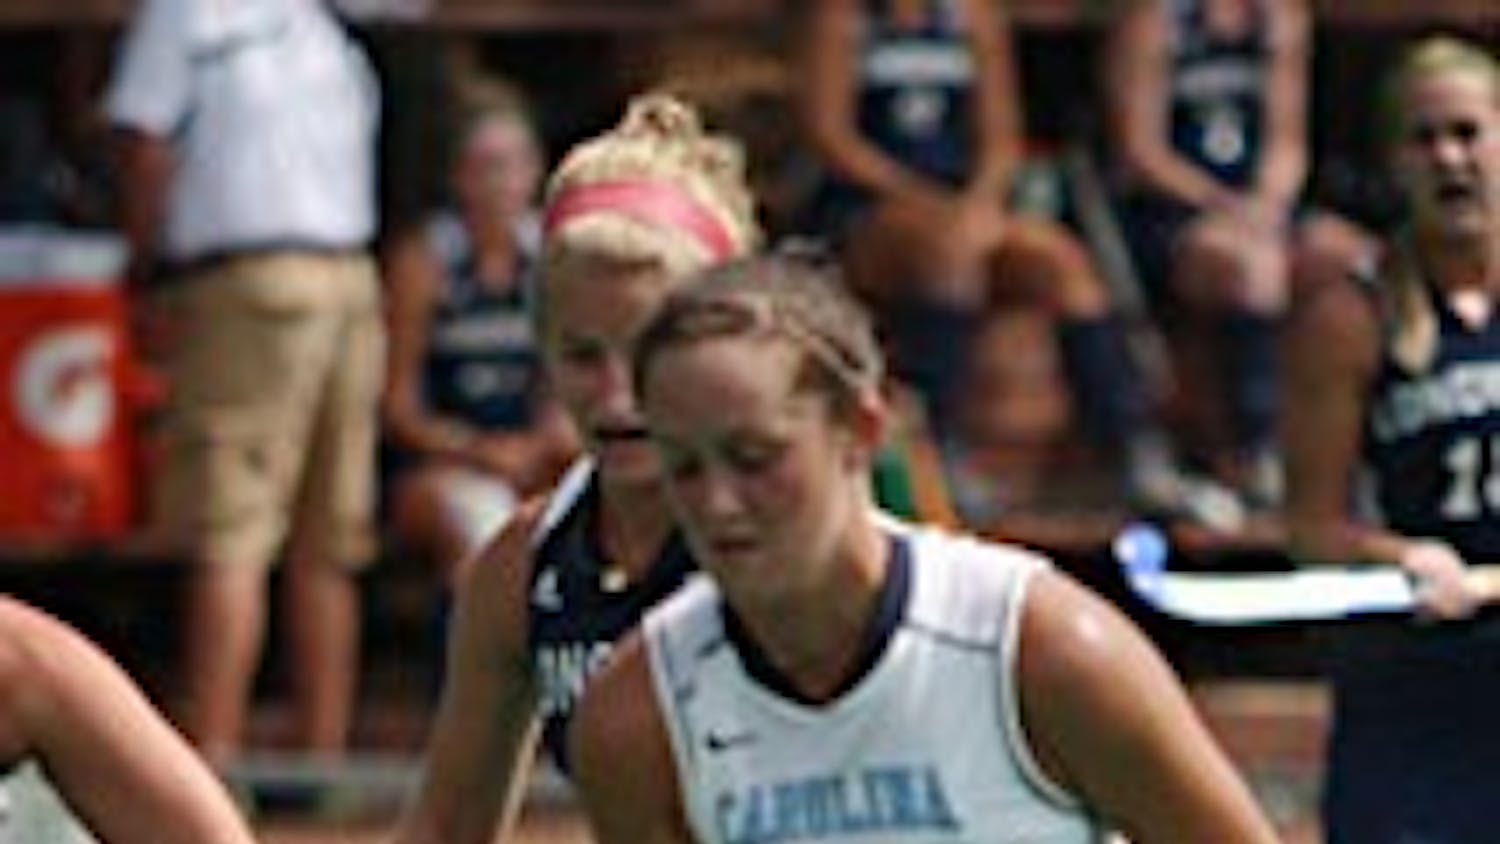 Melanie Brill maintains the ball against Longwood during UNC’s 6-0 win on Sunday. DTH/Liz Ladzinski